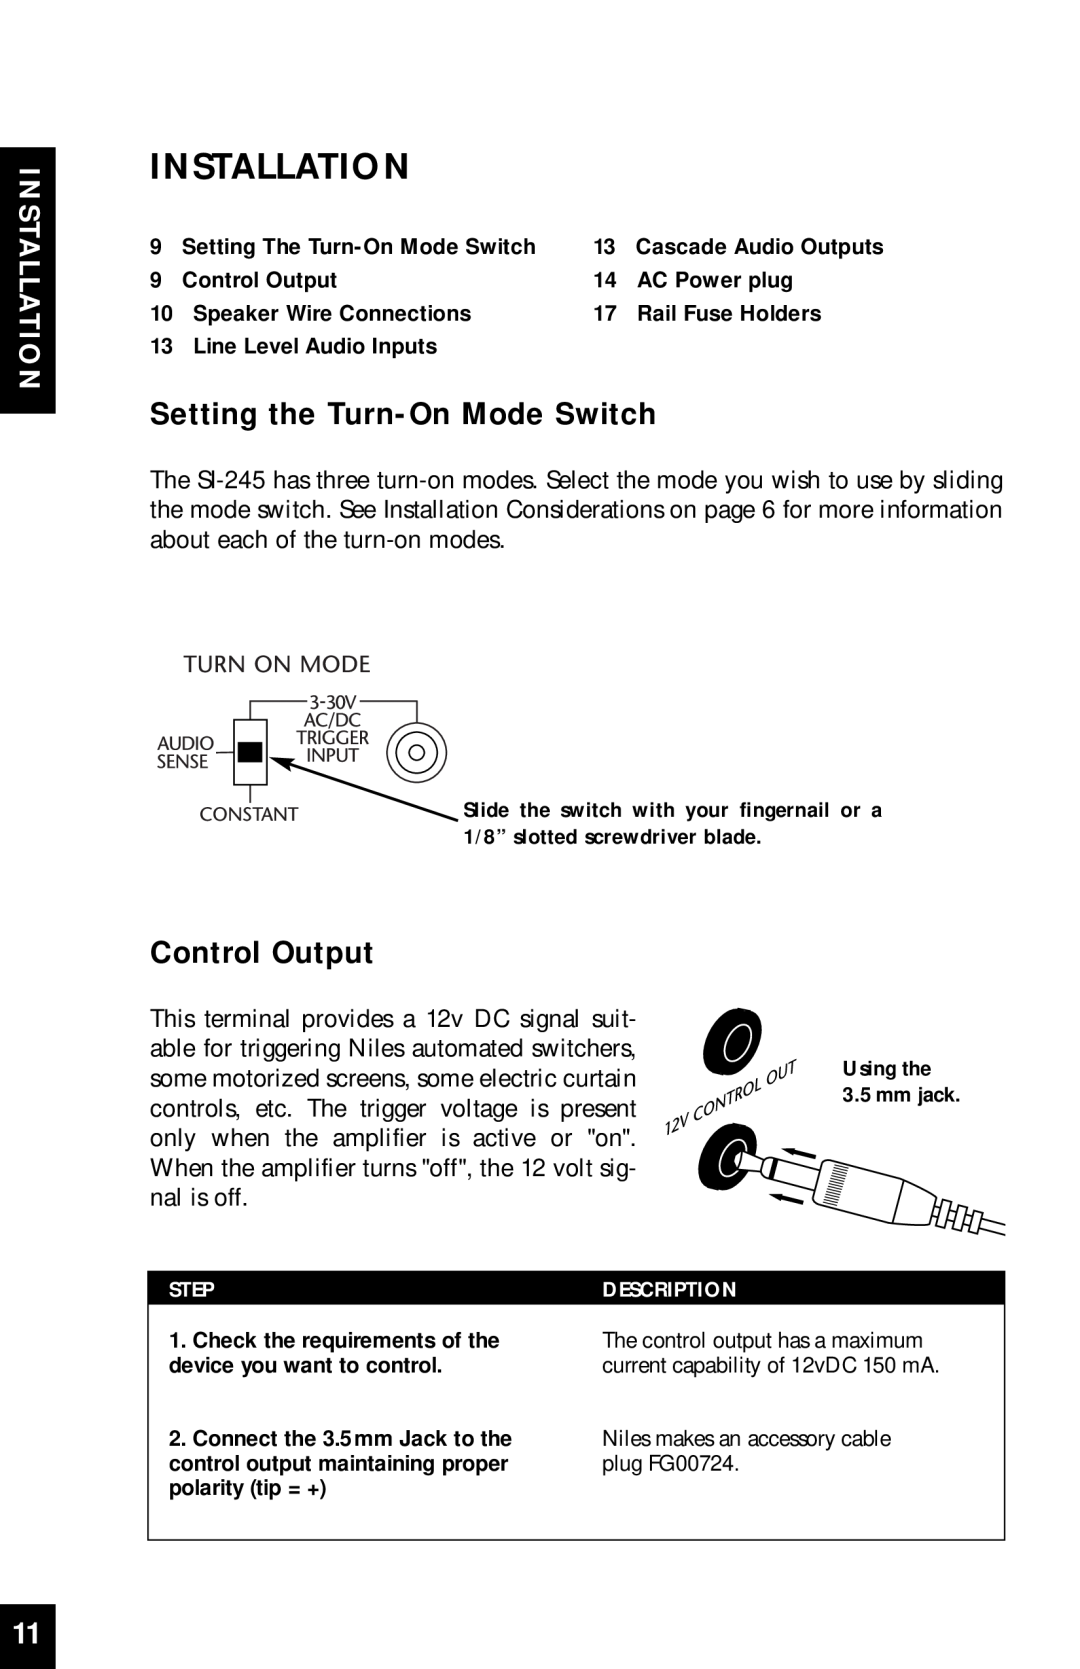 Niles Audio SI-245 manual Installation, Setting the Turn-OnMode Switch, Control Output 